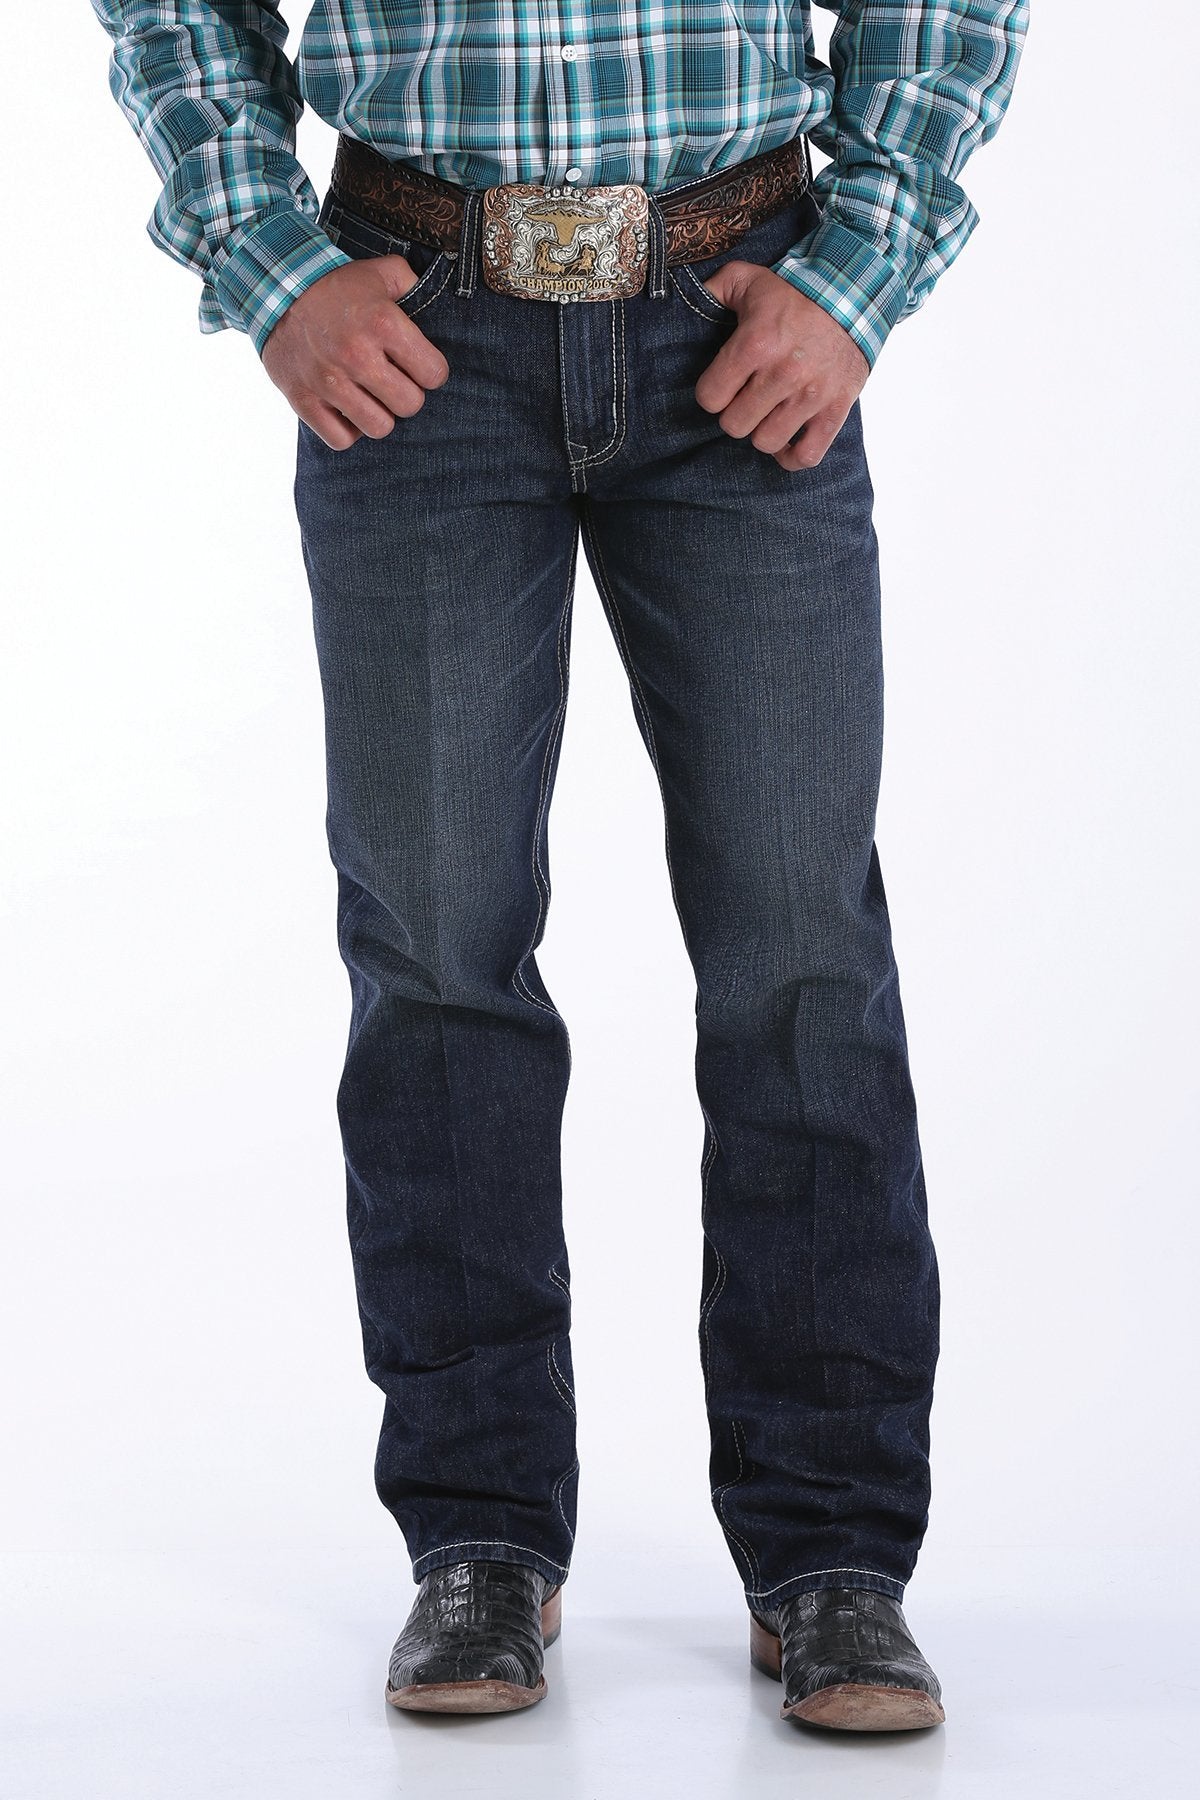 CINCH GRANT RELAXED FIT DARK WASH JEAN